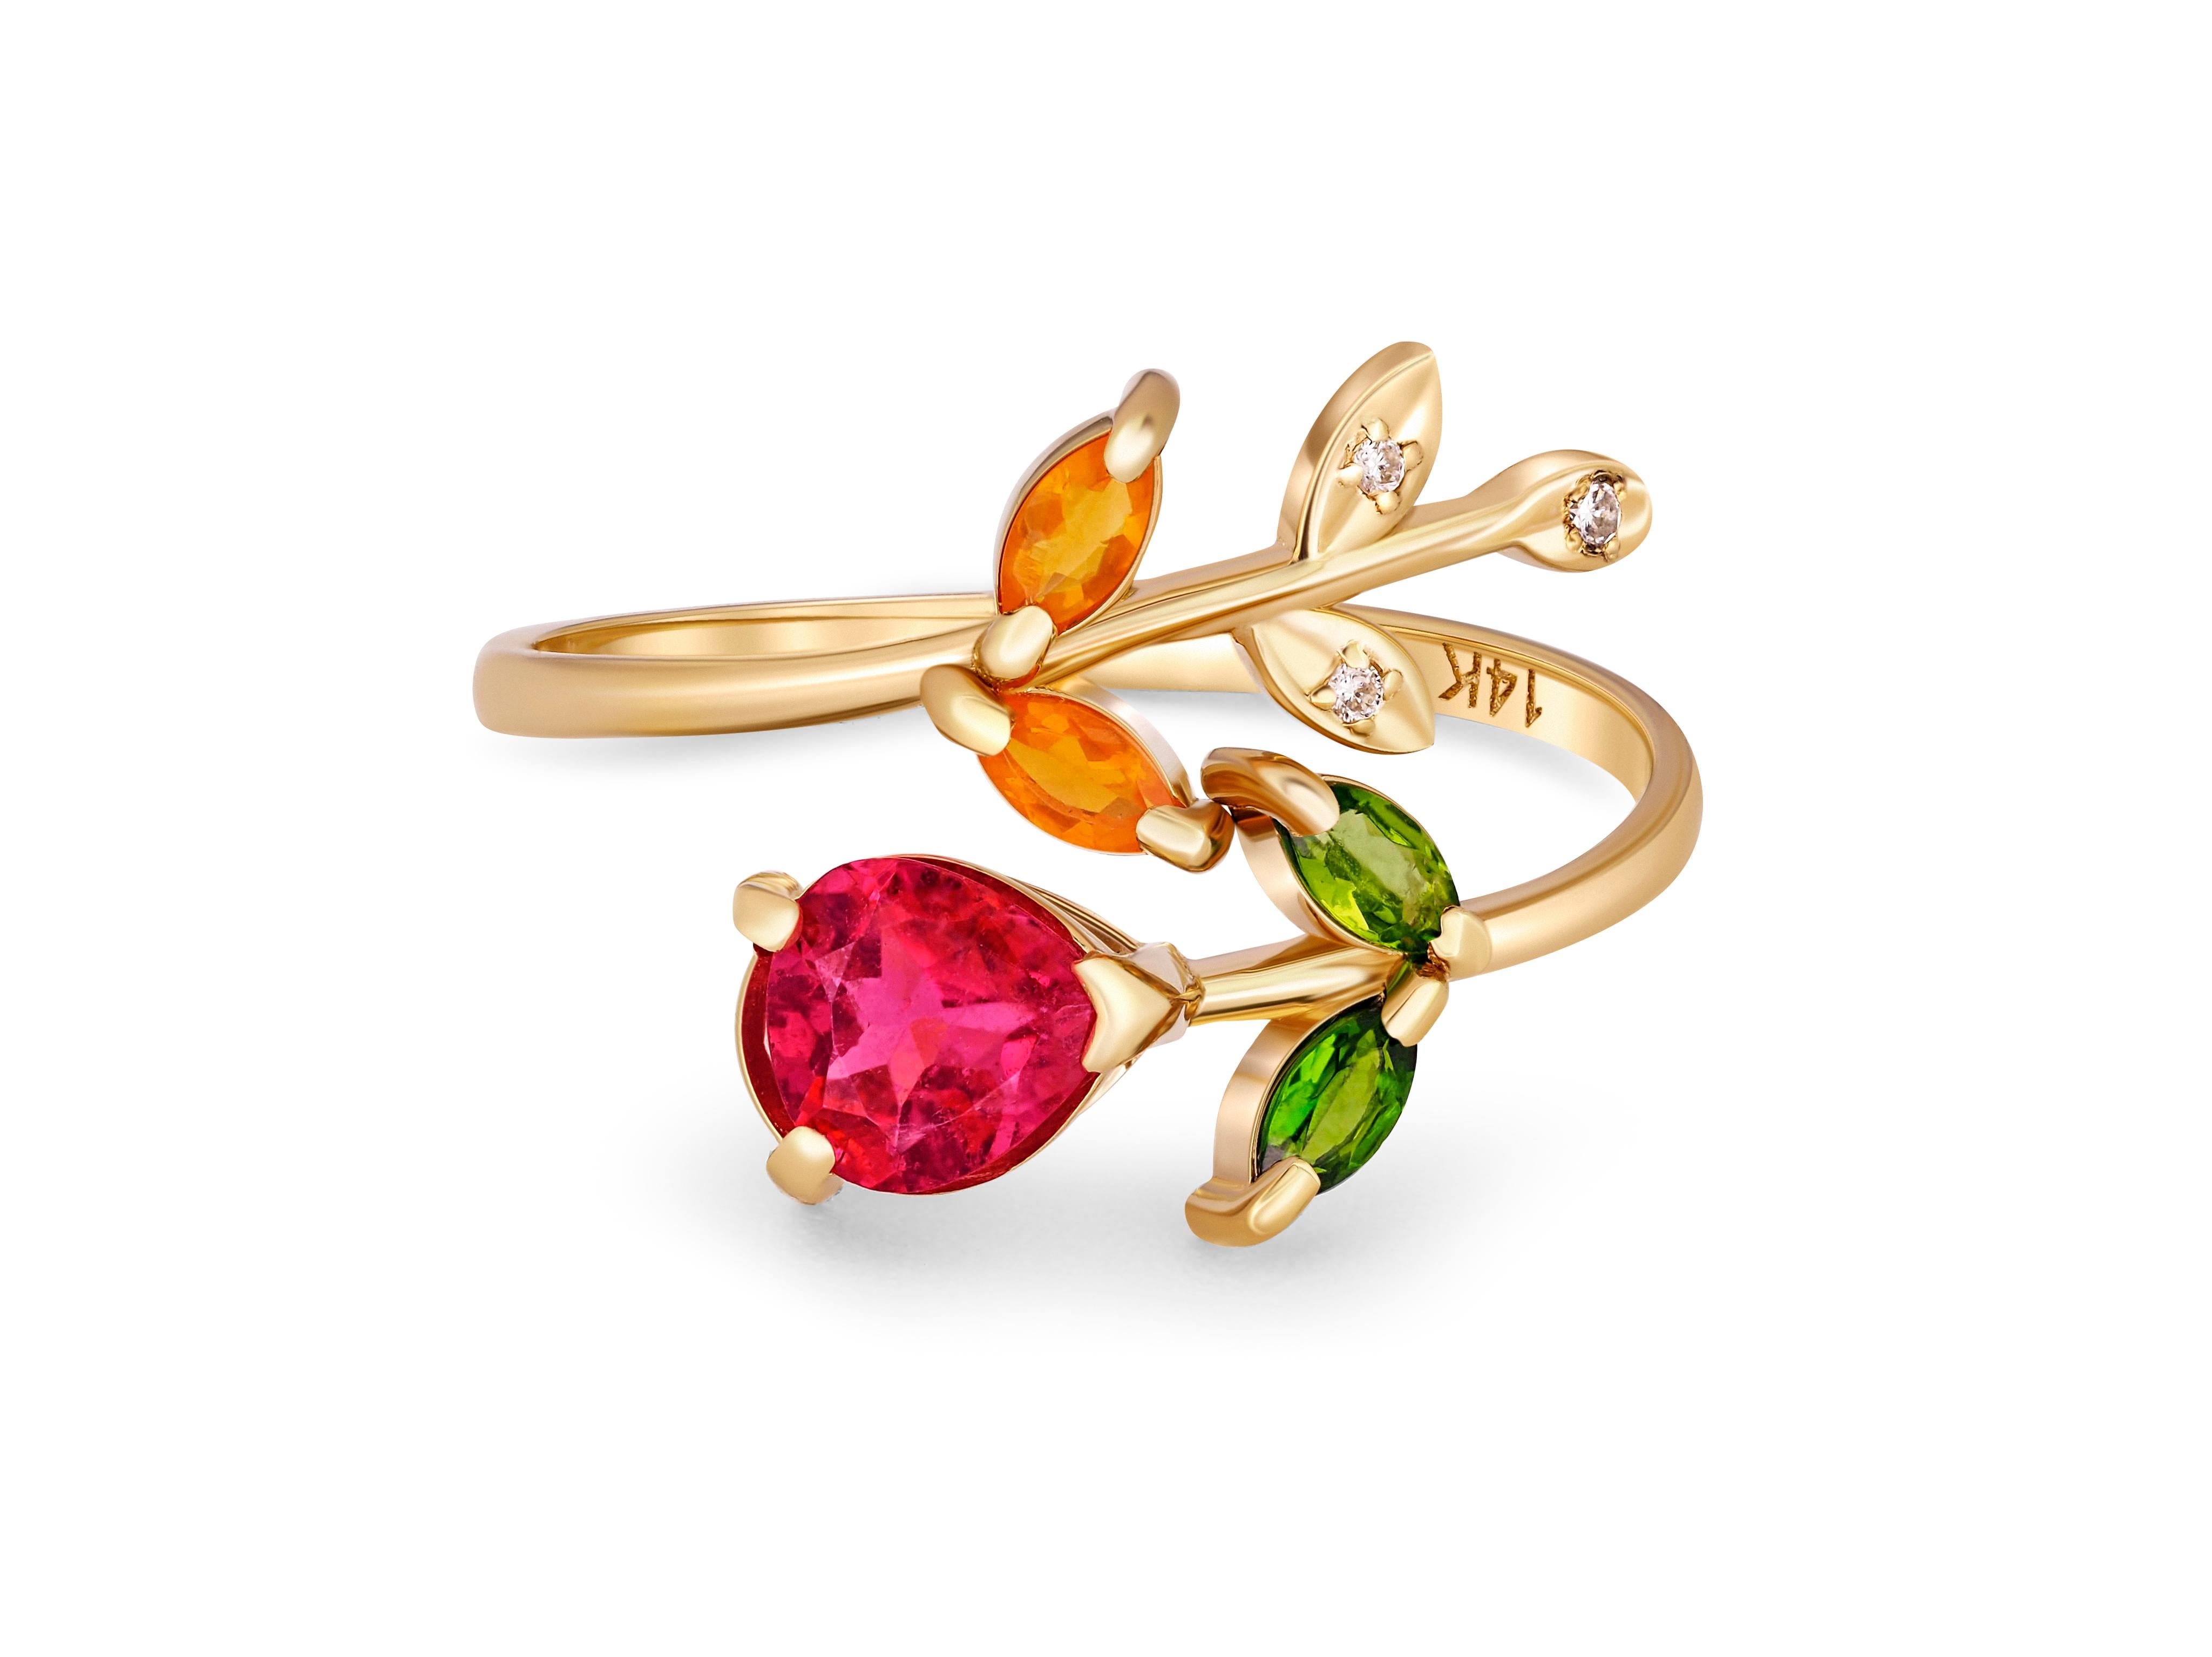 Pink tourmaline ring in 14k gold. 
Rubelite tourmaline gold ring. Flower gold ting. Open ended ring. Colorfull ring. October birthstone ring.

Metal: 14k gold
Weight: 2.55 g. depends from size.

Set with tourmaline, pink color.
Pear shape, approx